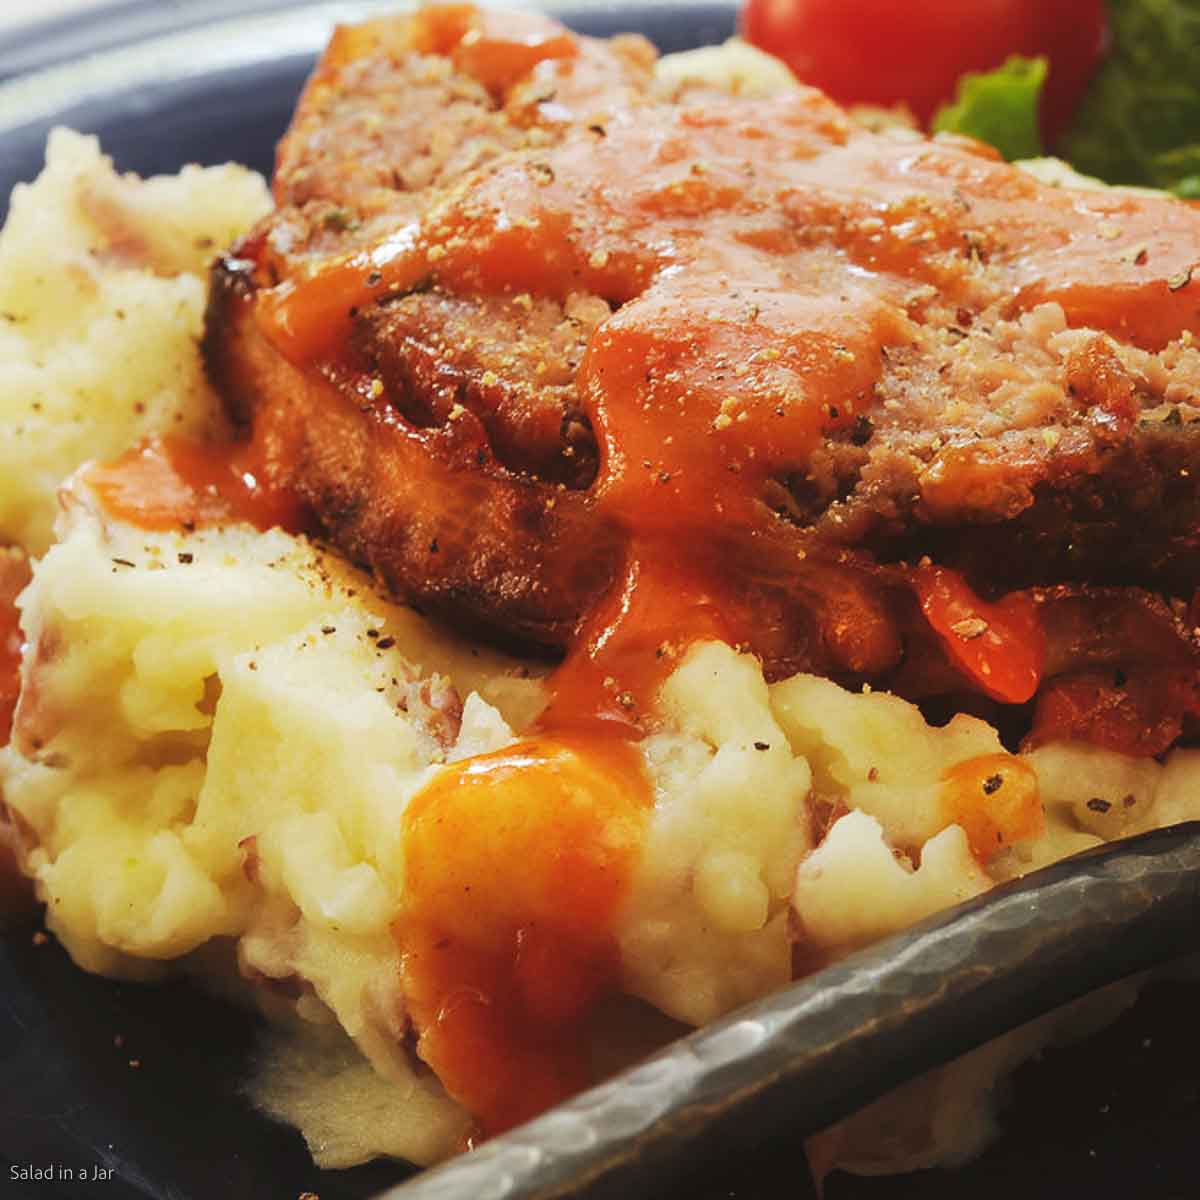 blackened meatloaf on top of mashed potatoes and drizzled with tomato gravy.